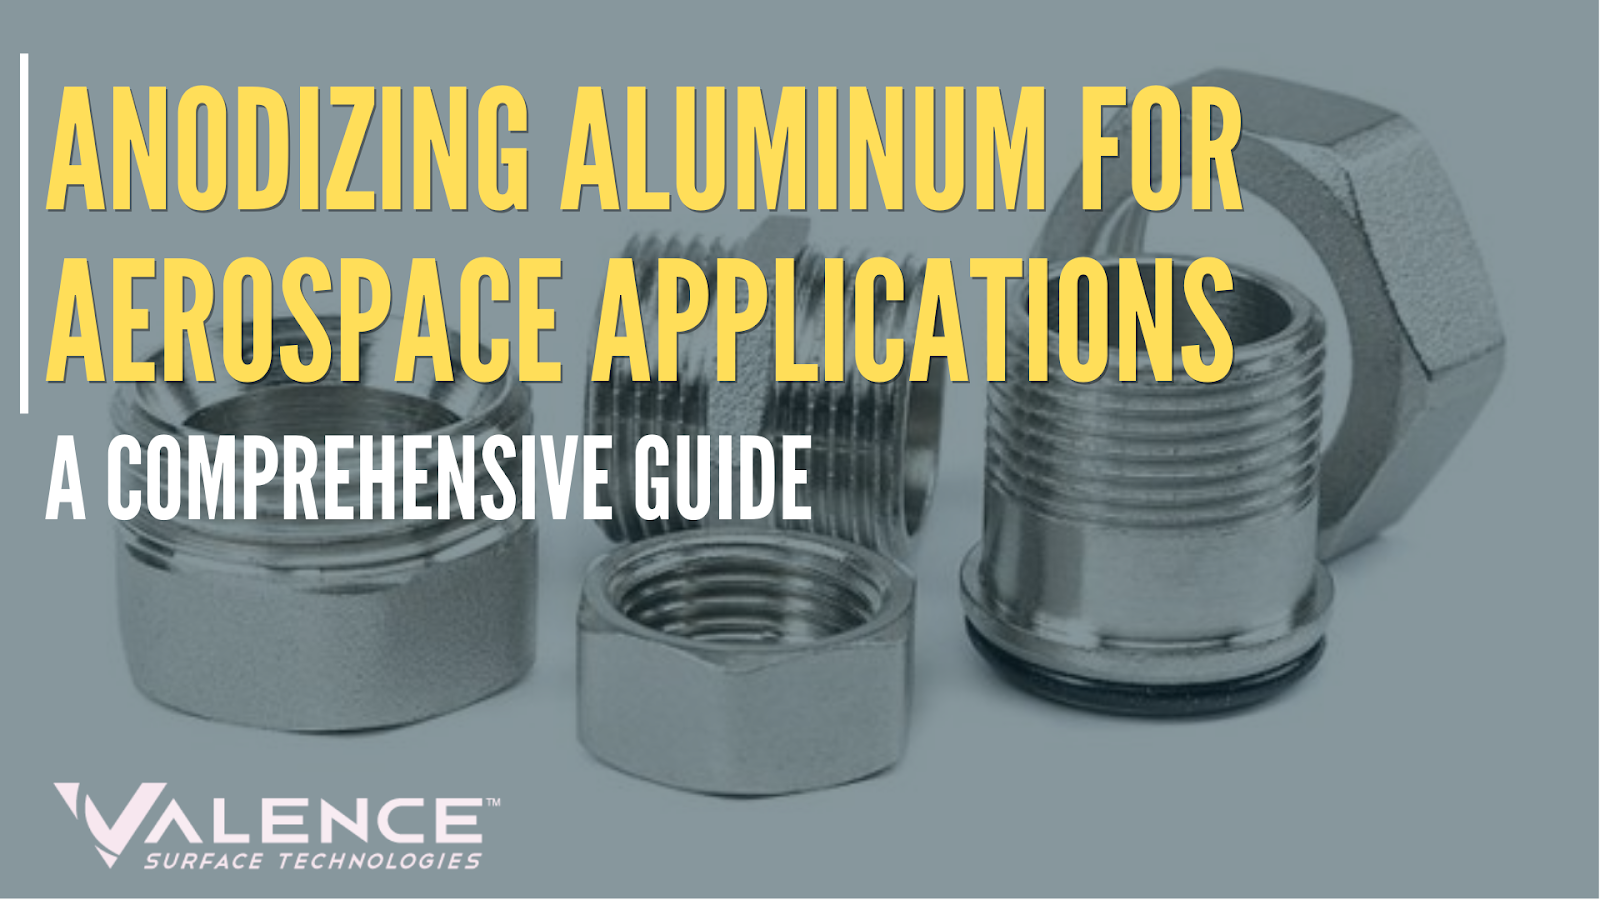 The Complete Guide To Anodizing Aluminum Parts - Aerospace Metals